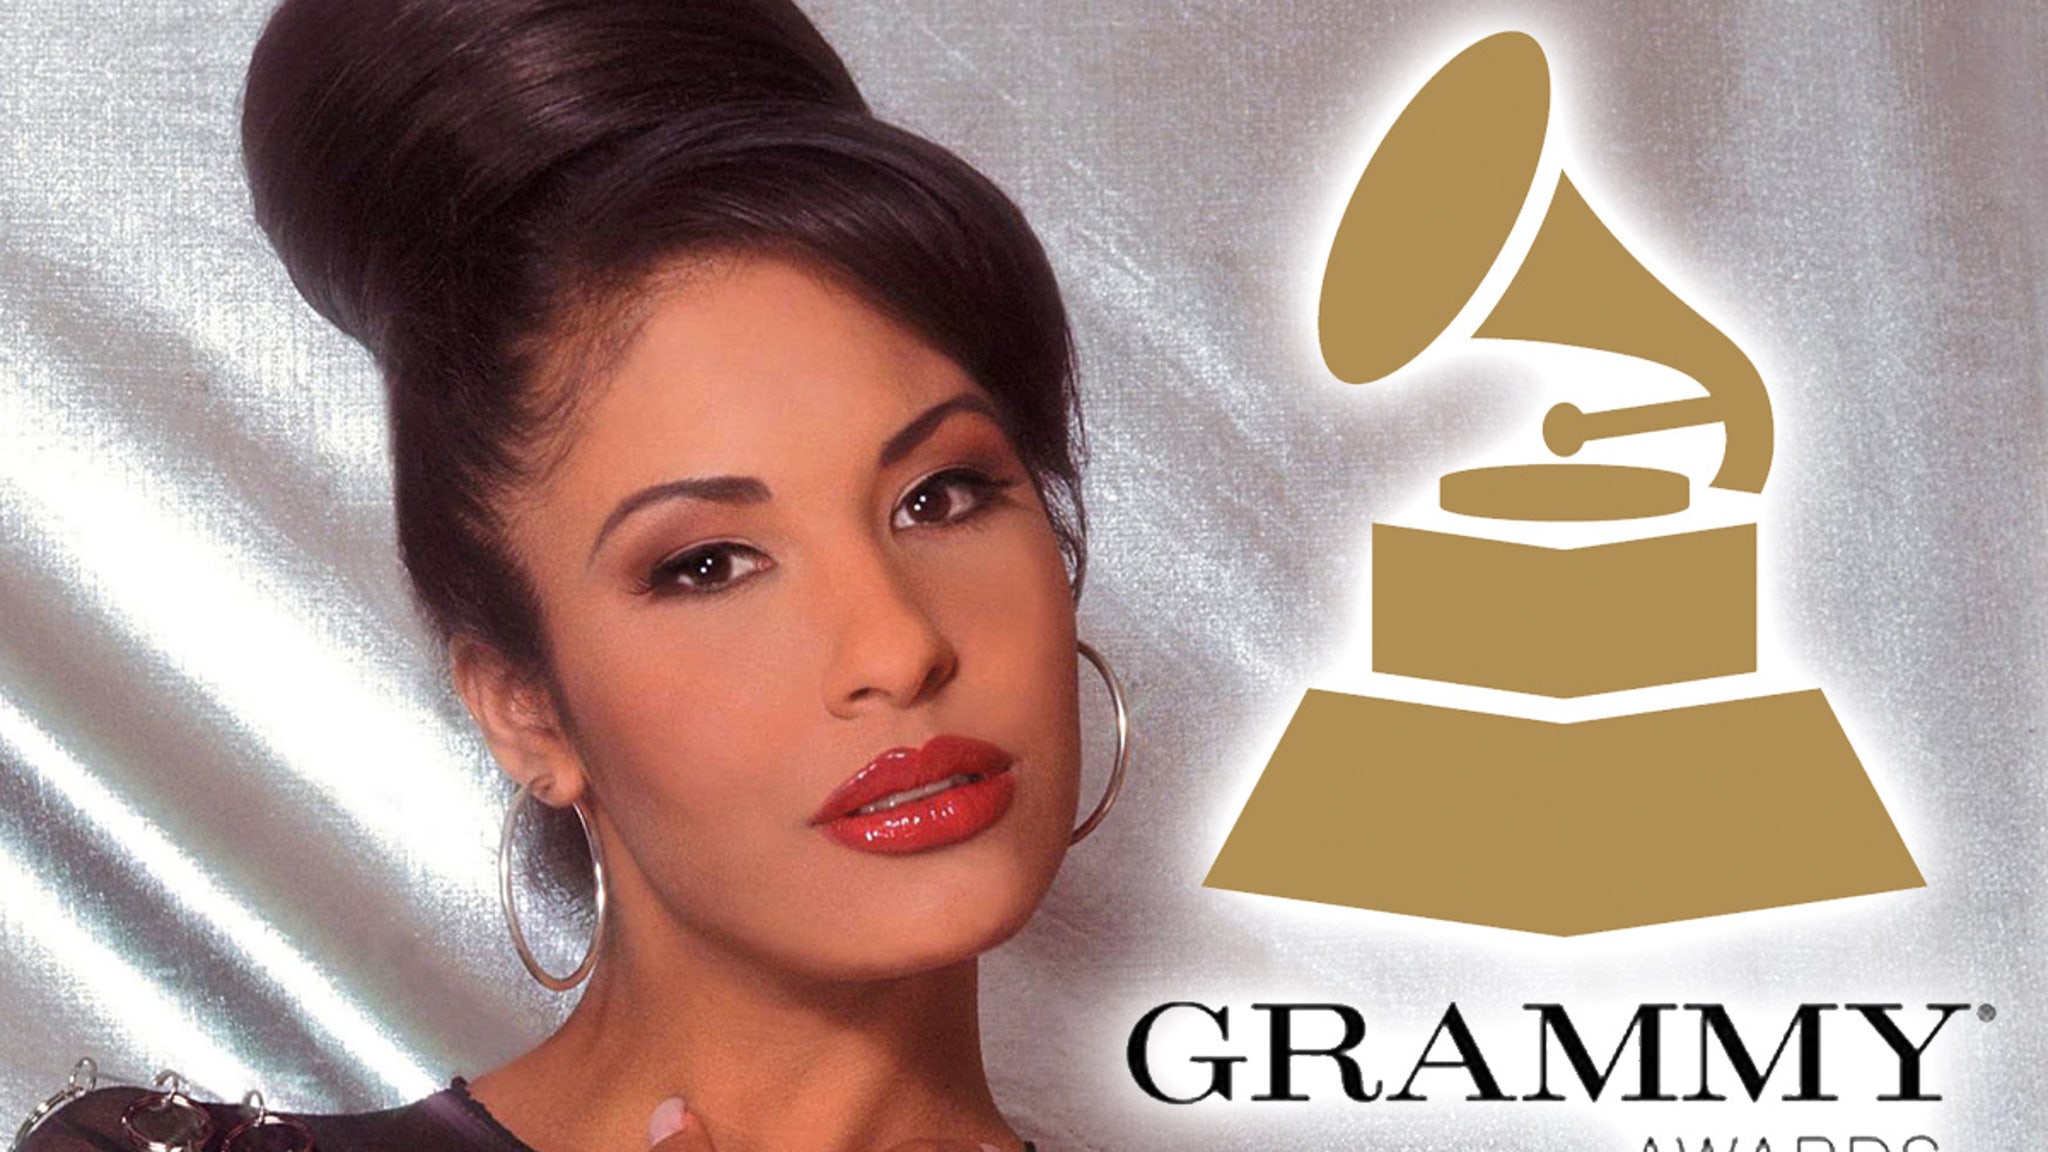 Selena’s Bro Says Family Wants to Posthumous Award in Grammys Accepted